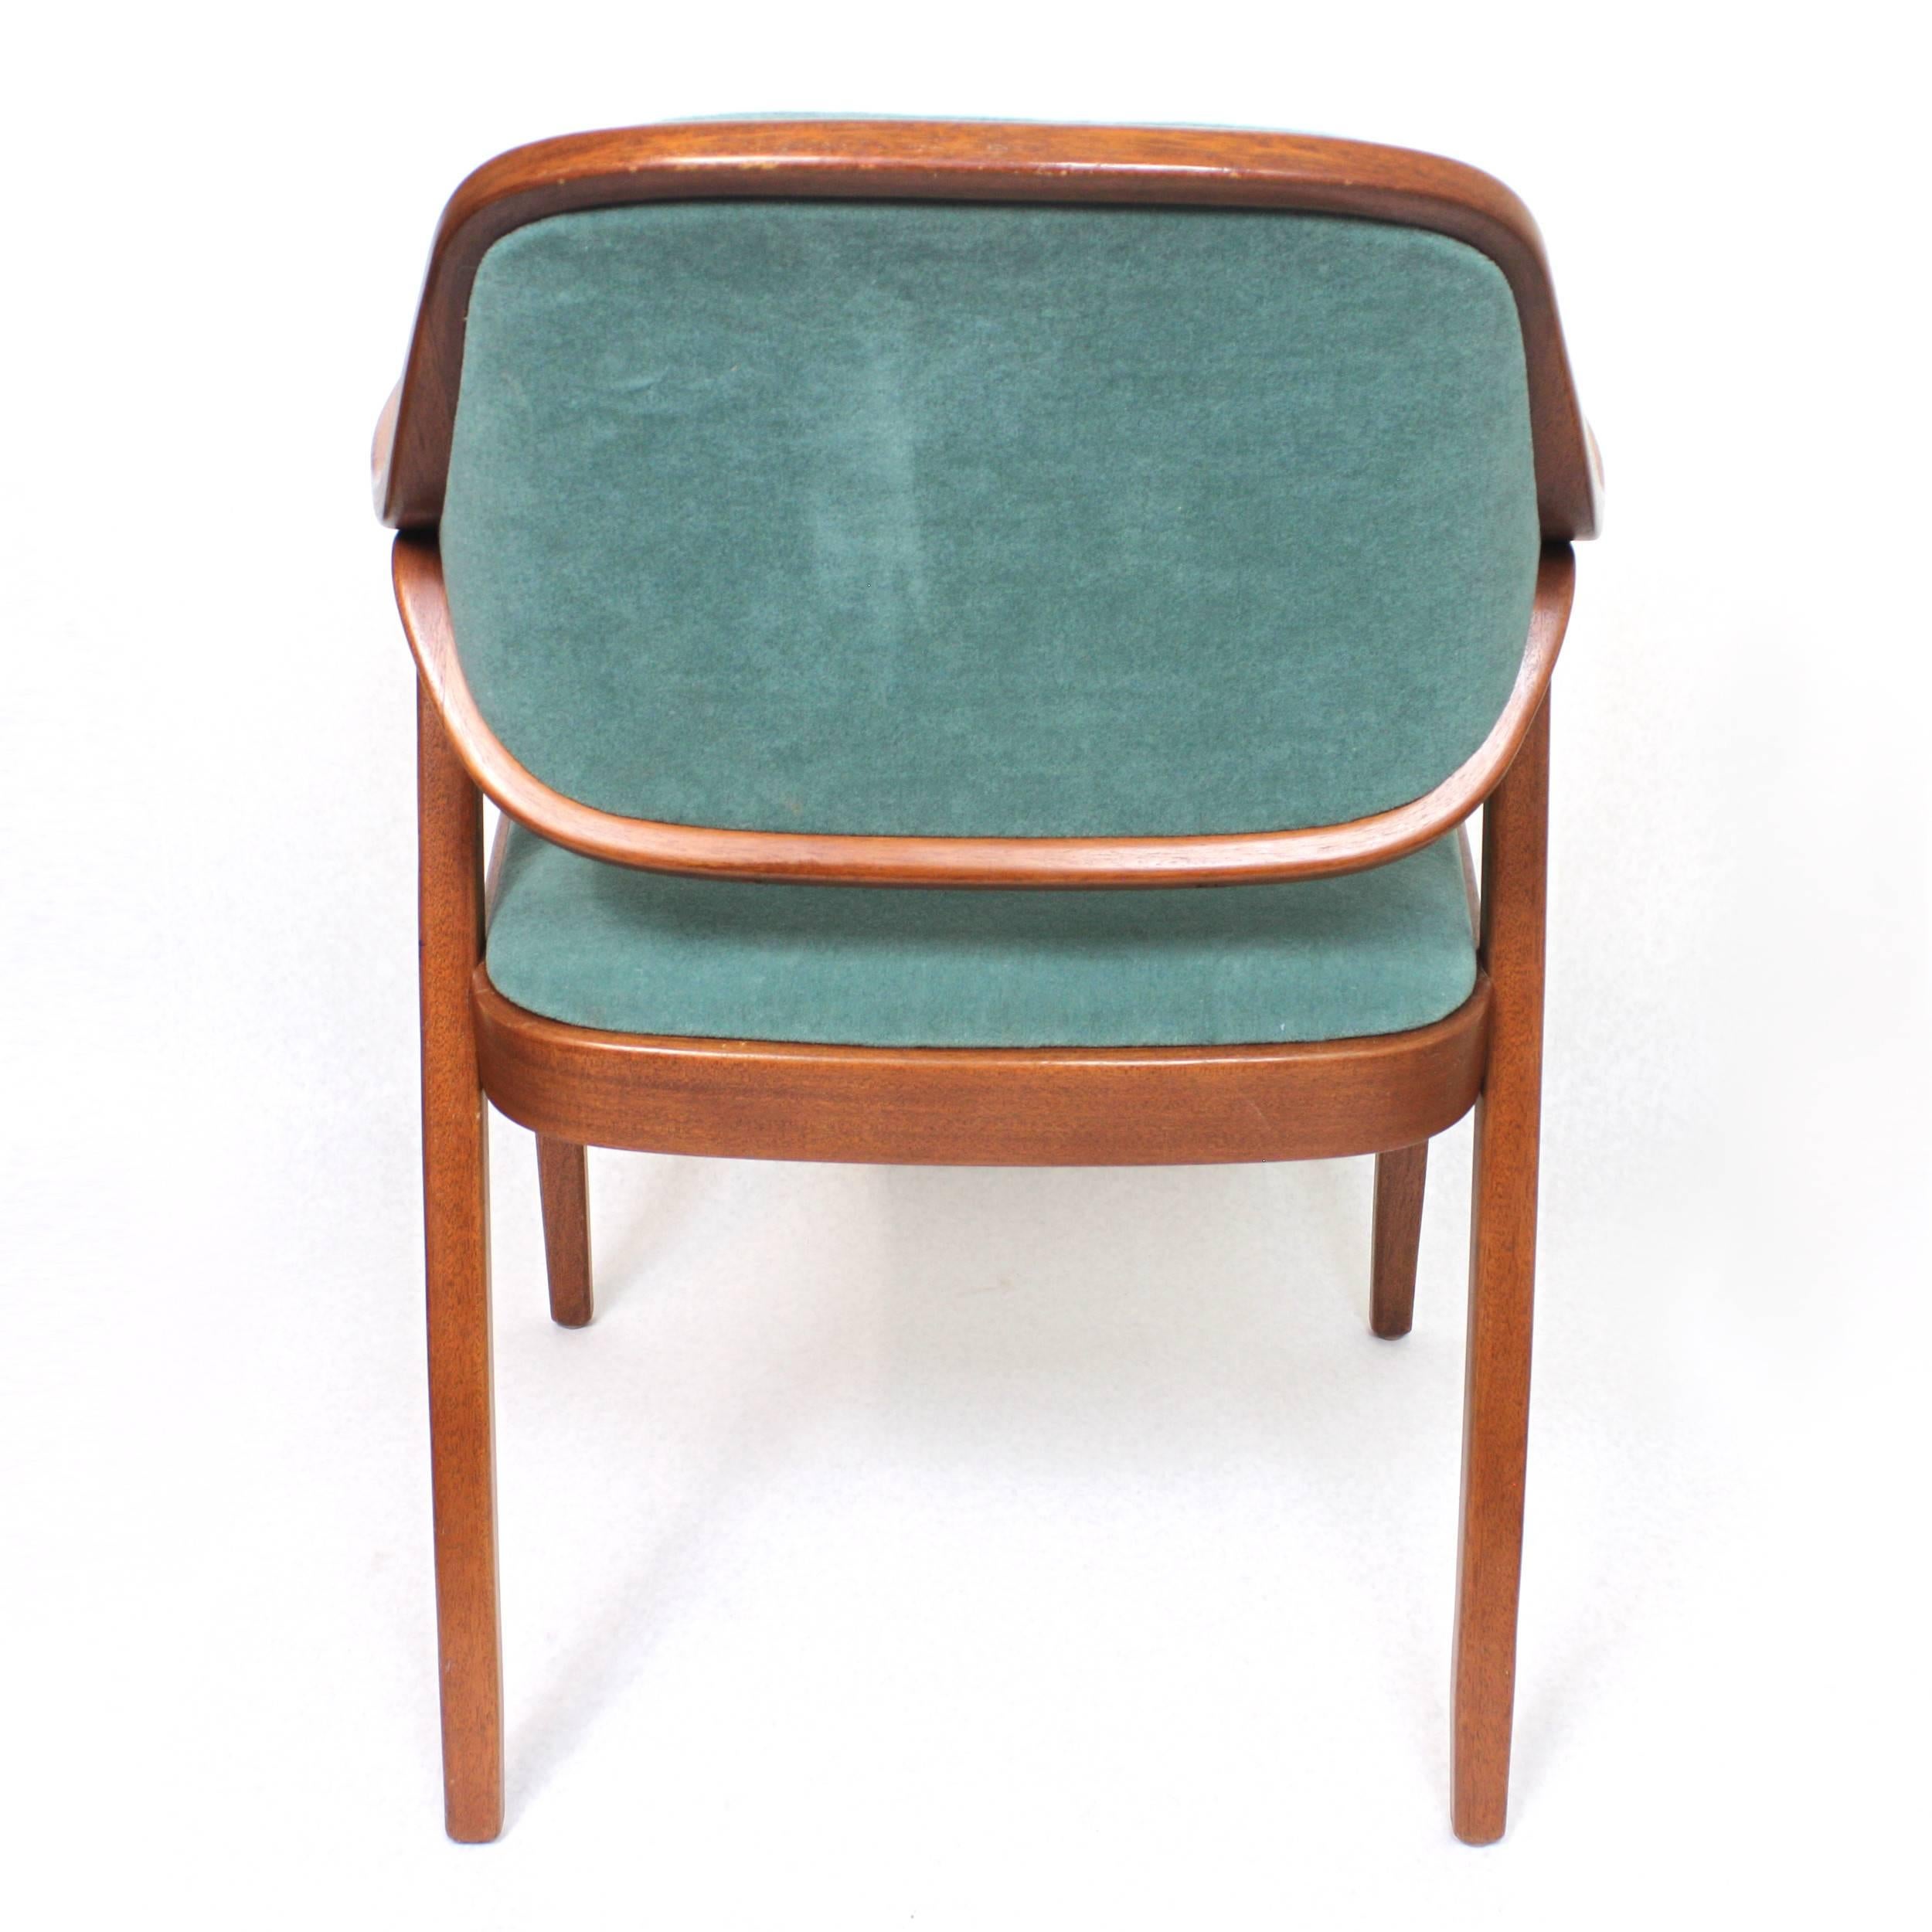 Pair of Mid-Century Modern Bentwood Mahogany Side Chairs by Don Pettit for Knoll 4